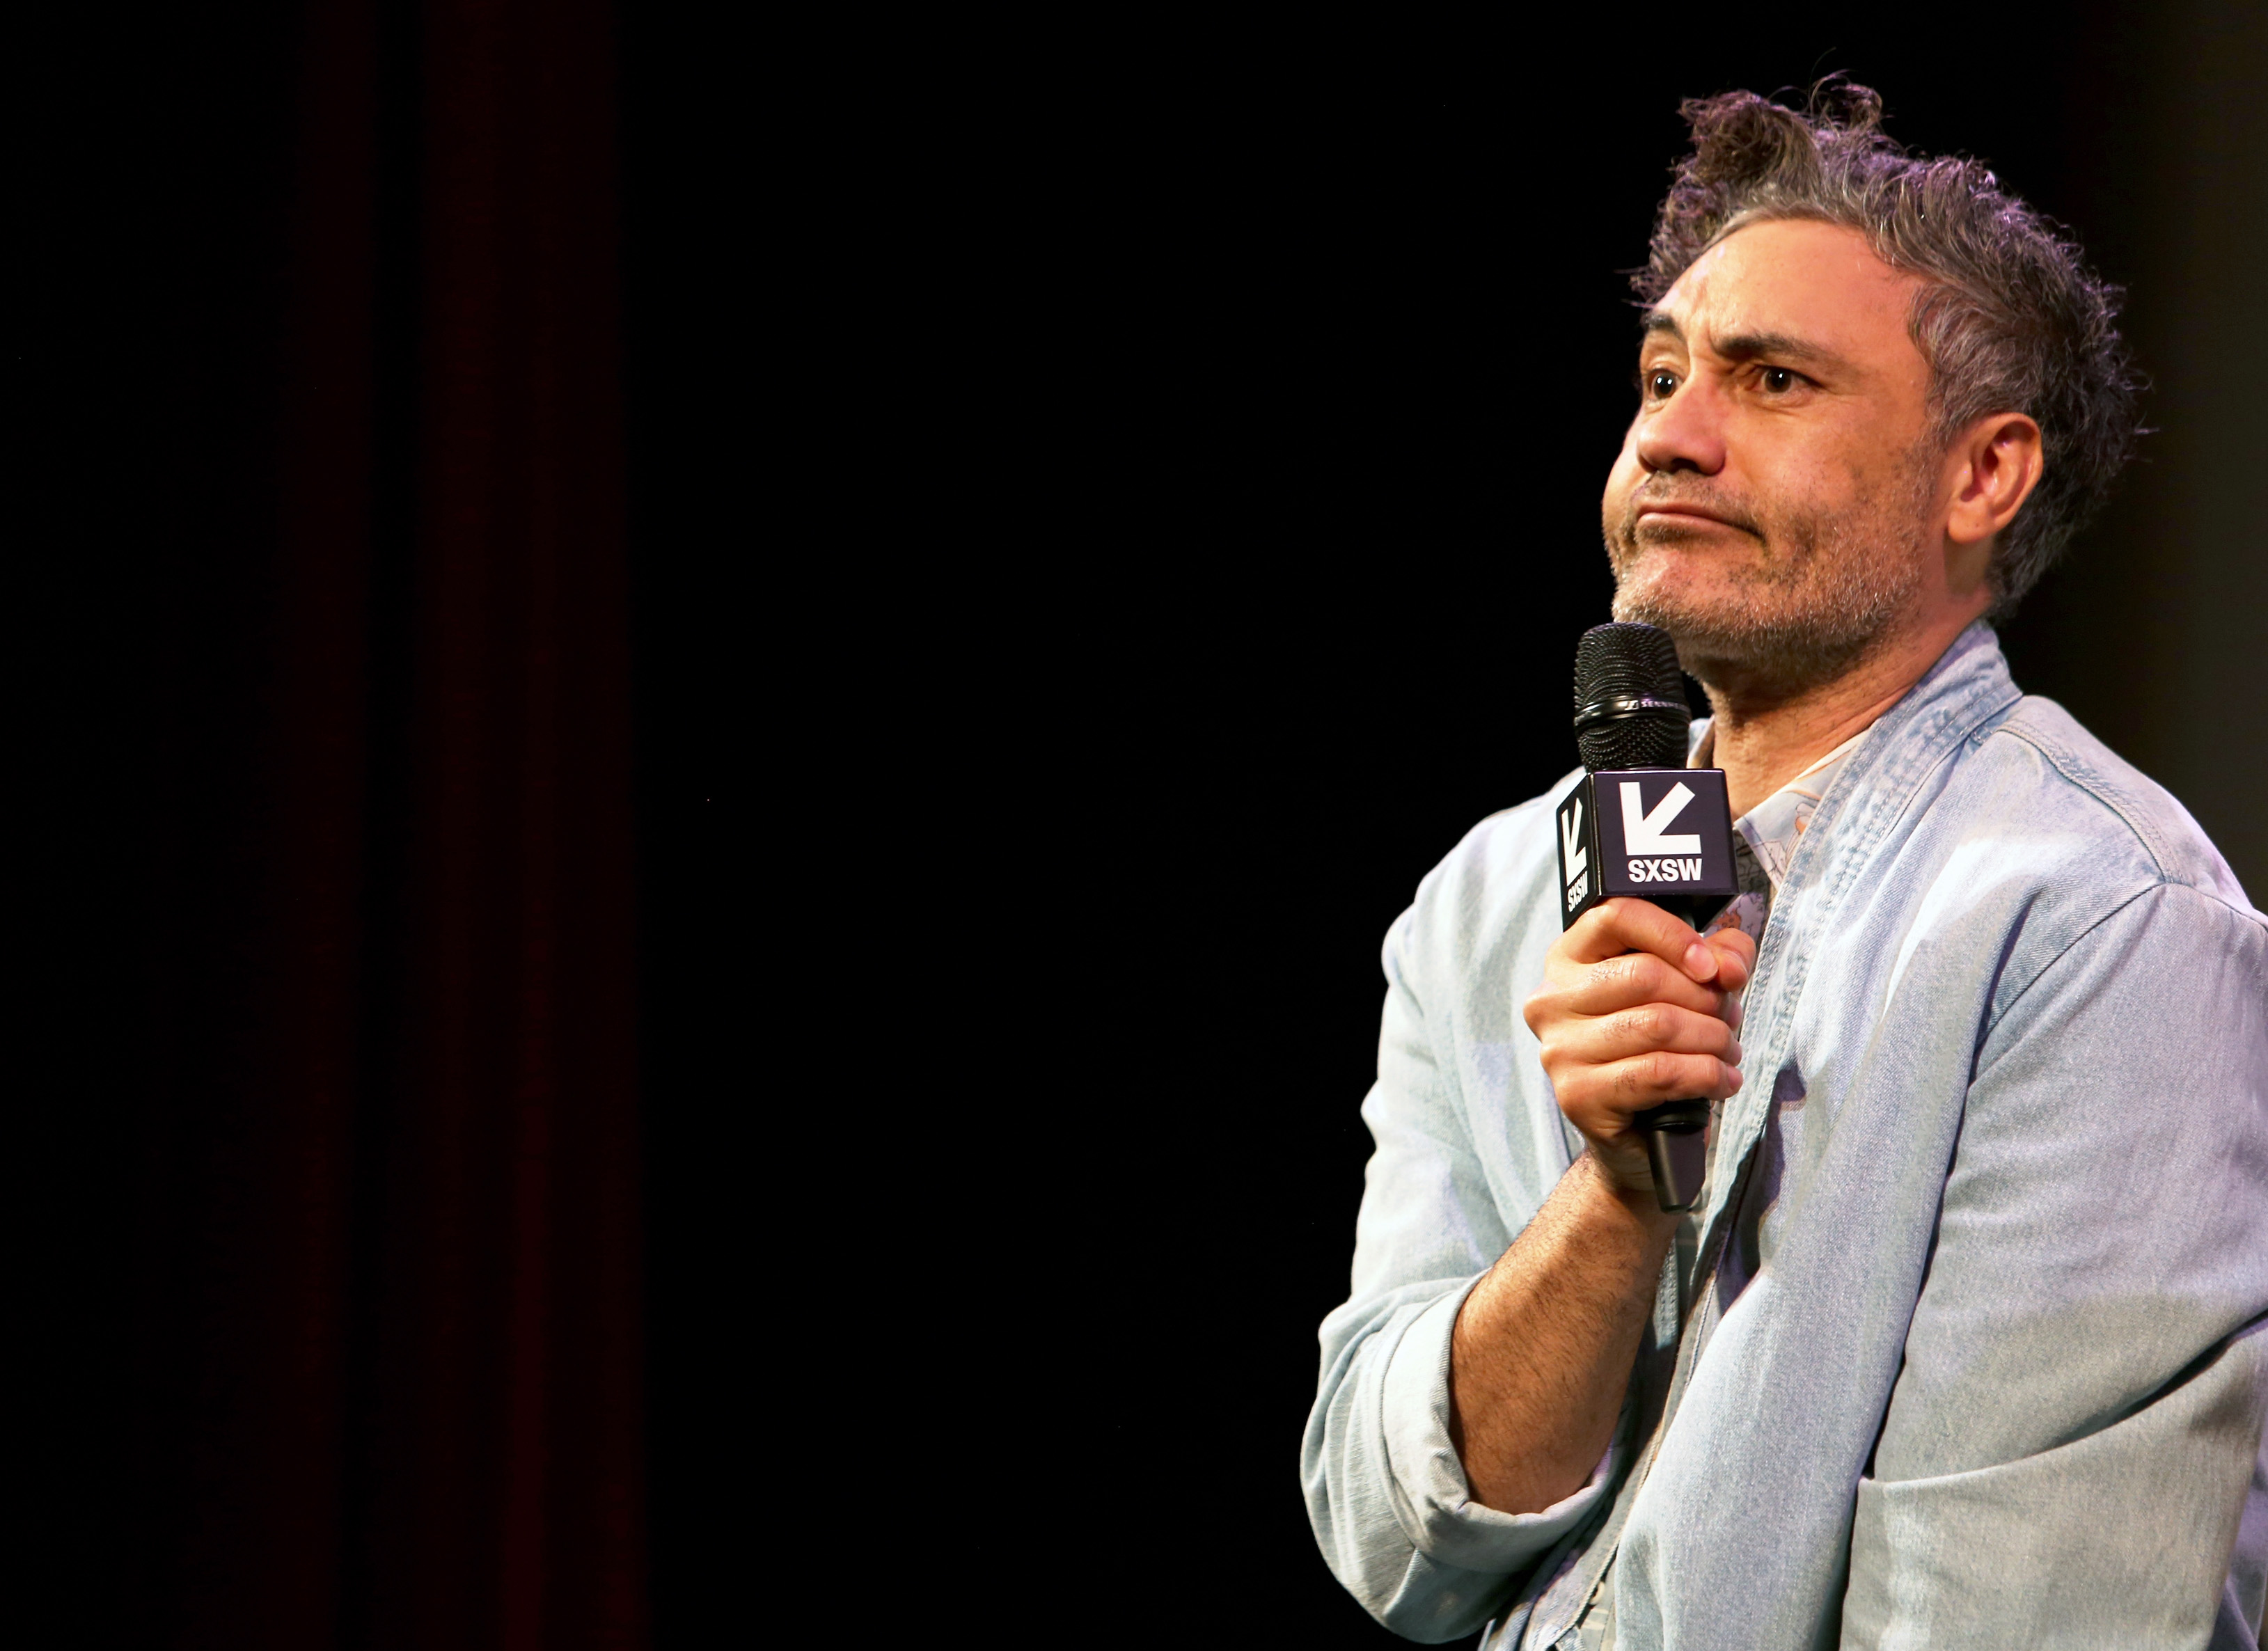 Taika Waititi speaks onstage at the "What We Do in the Shadows" Premiere during the 2019 SXSW Conference and Festivals at Paramount Theatre on March 8, 2019 in Austin, Texas.  (Photo by Travis P Ball/Getty Images for SXSW) (Travis P Ball—Getty Images for SXSW)